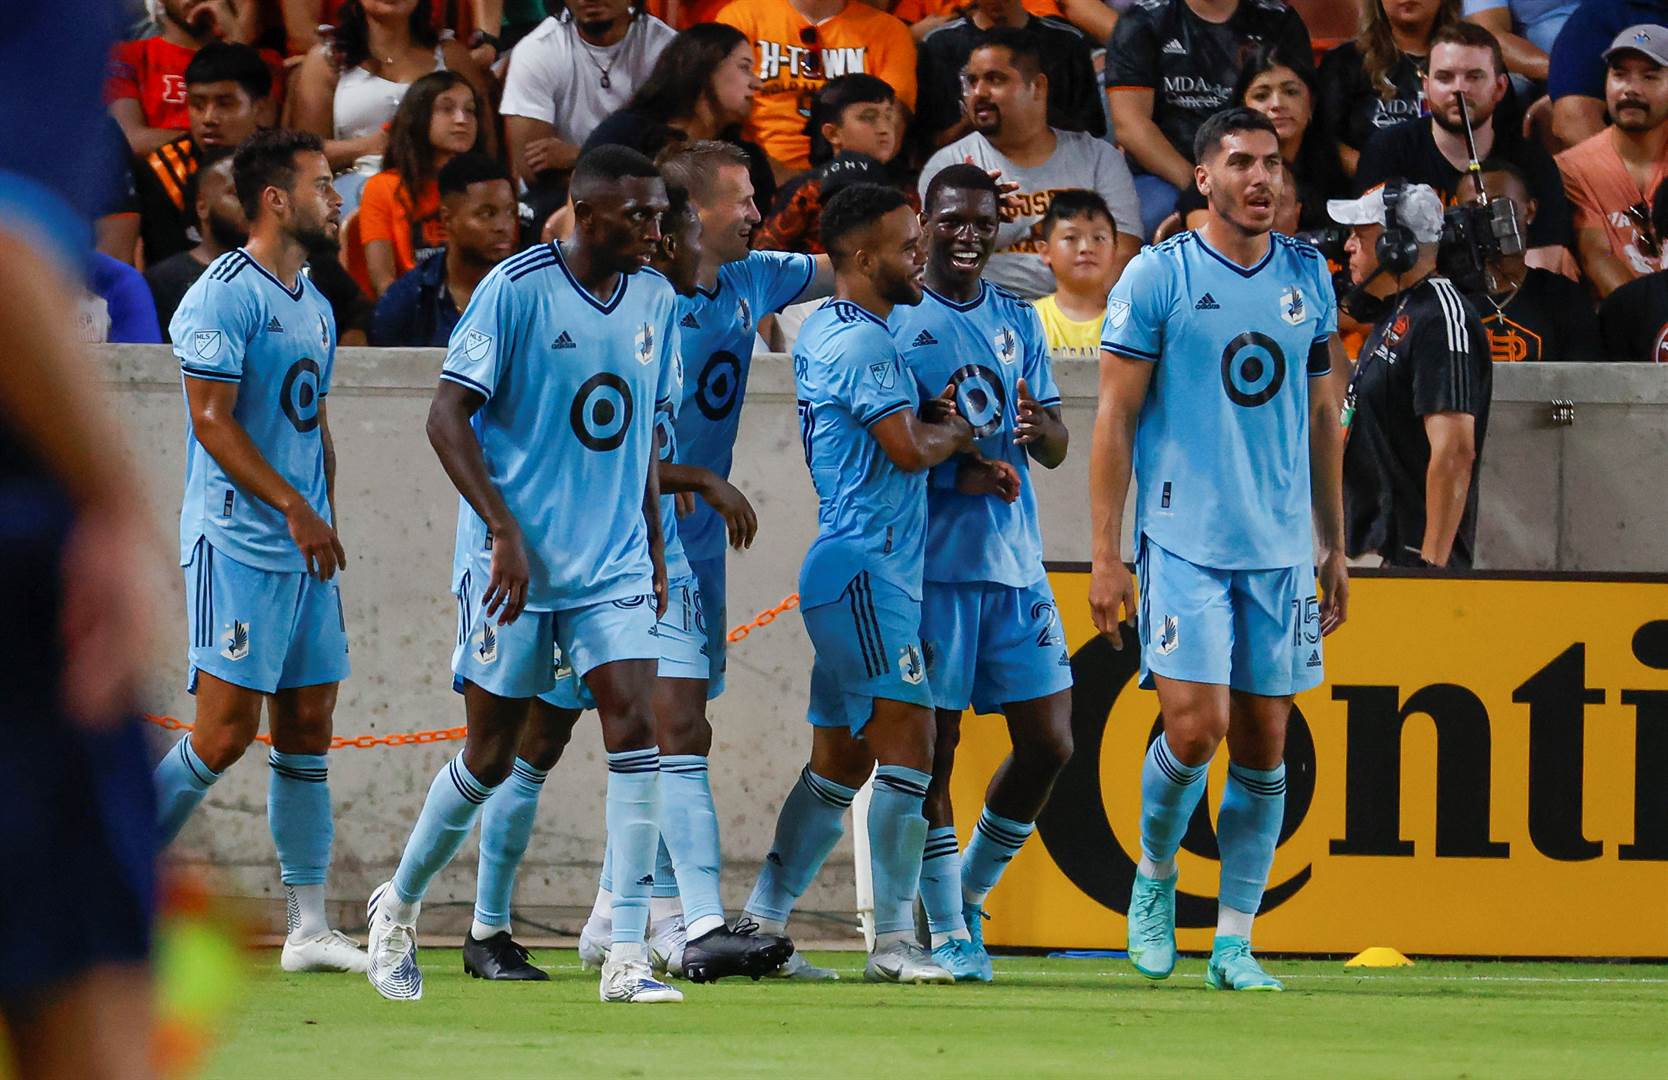 Images provided by Minnesota United